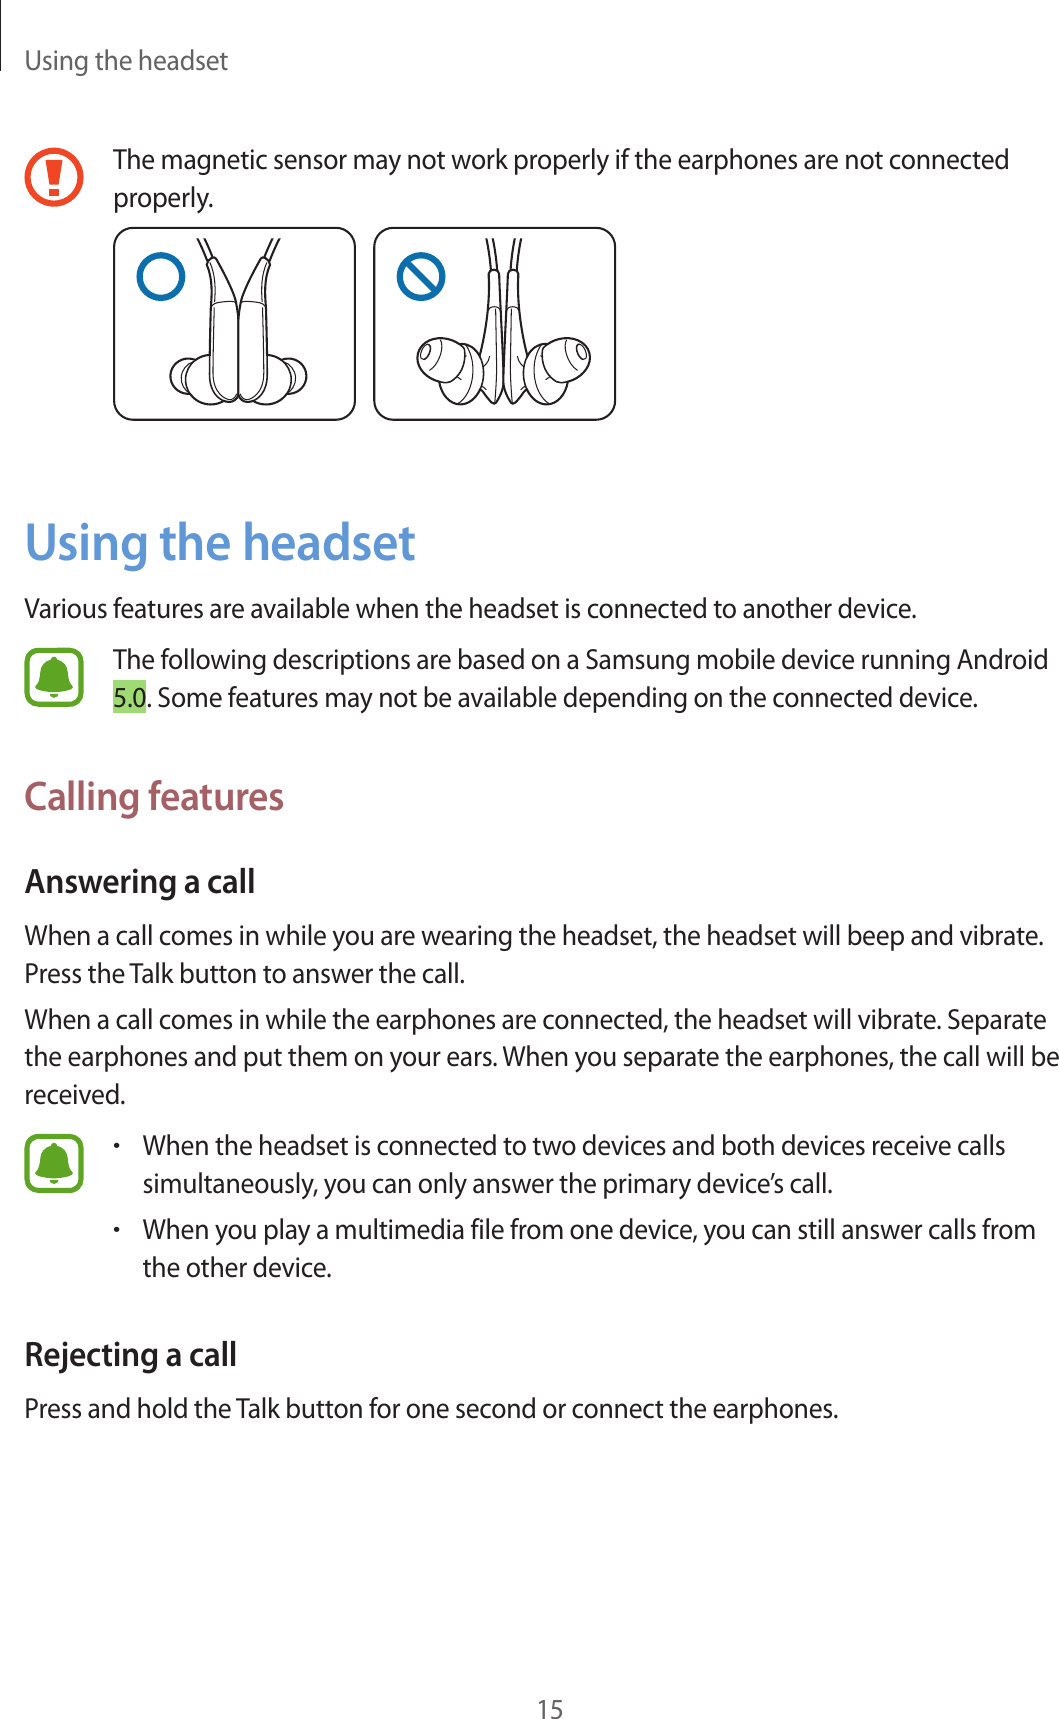 Using the headset15The magnetic sensor may not work properly if the earphones are not connected properly.Using the headsetVarious features are available when the headset is connected to another device.The following descriptions are based on a Samsung mobile device running Android 5.0. Some features may not be available depending on the connected device.Calling featuresAnswering a callWhen a call comes in while you are wearing the headset, the headset will beep and vibrate. Press the Talk button to answer the call.When a call comes in while the earphones are connected, the headset will vibrate. Separate the earphones and put them on your ears. When you separate the earphones, the call will be received.•When the headset is connected to two devices and both devices receive calls simultaneously, you can only answer the primary device’s call.•When you play a multimedia file from one device, you can still answer calls from the other device.Rejecting a callPress and hold the Talk button for one second or connect the earphones.